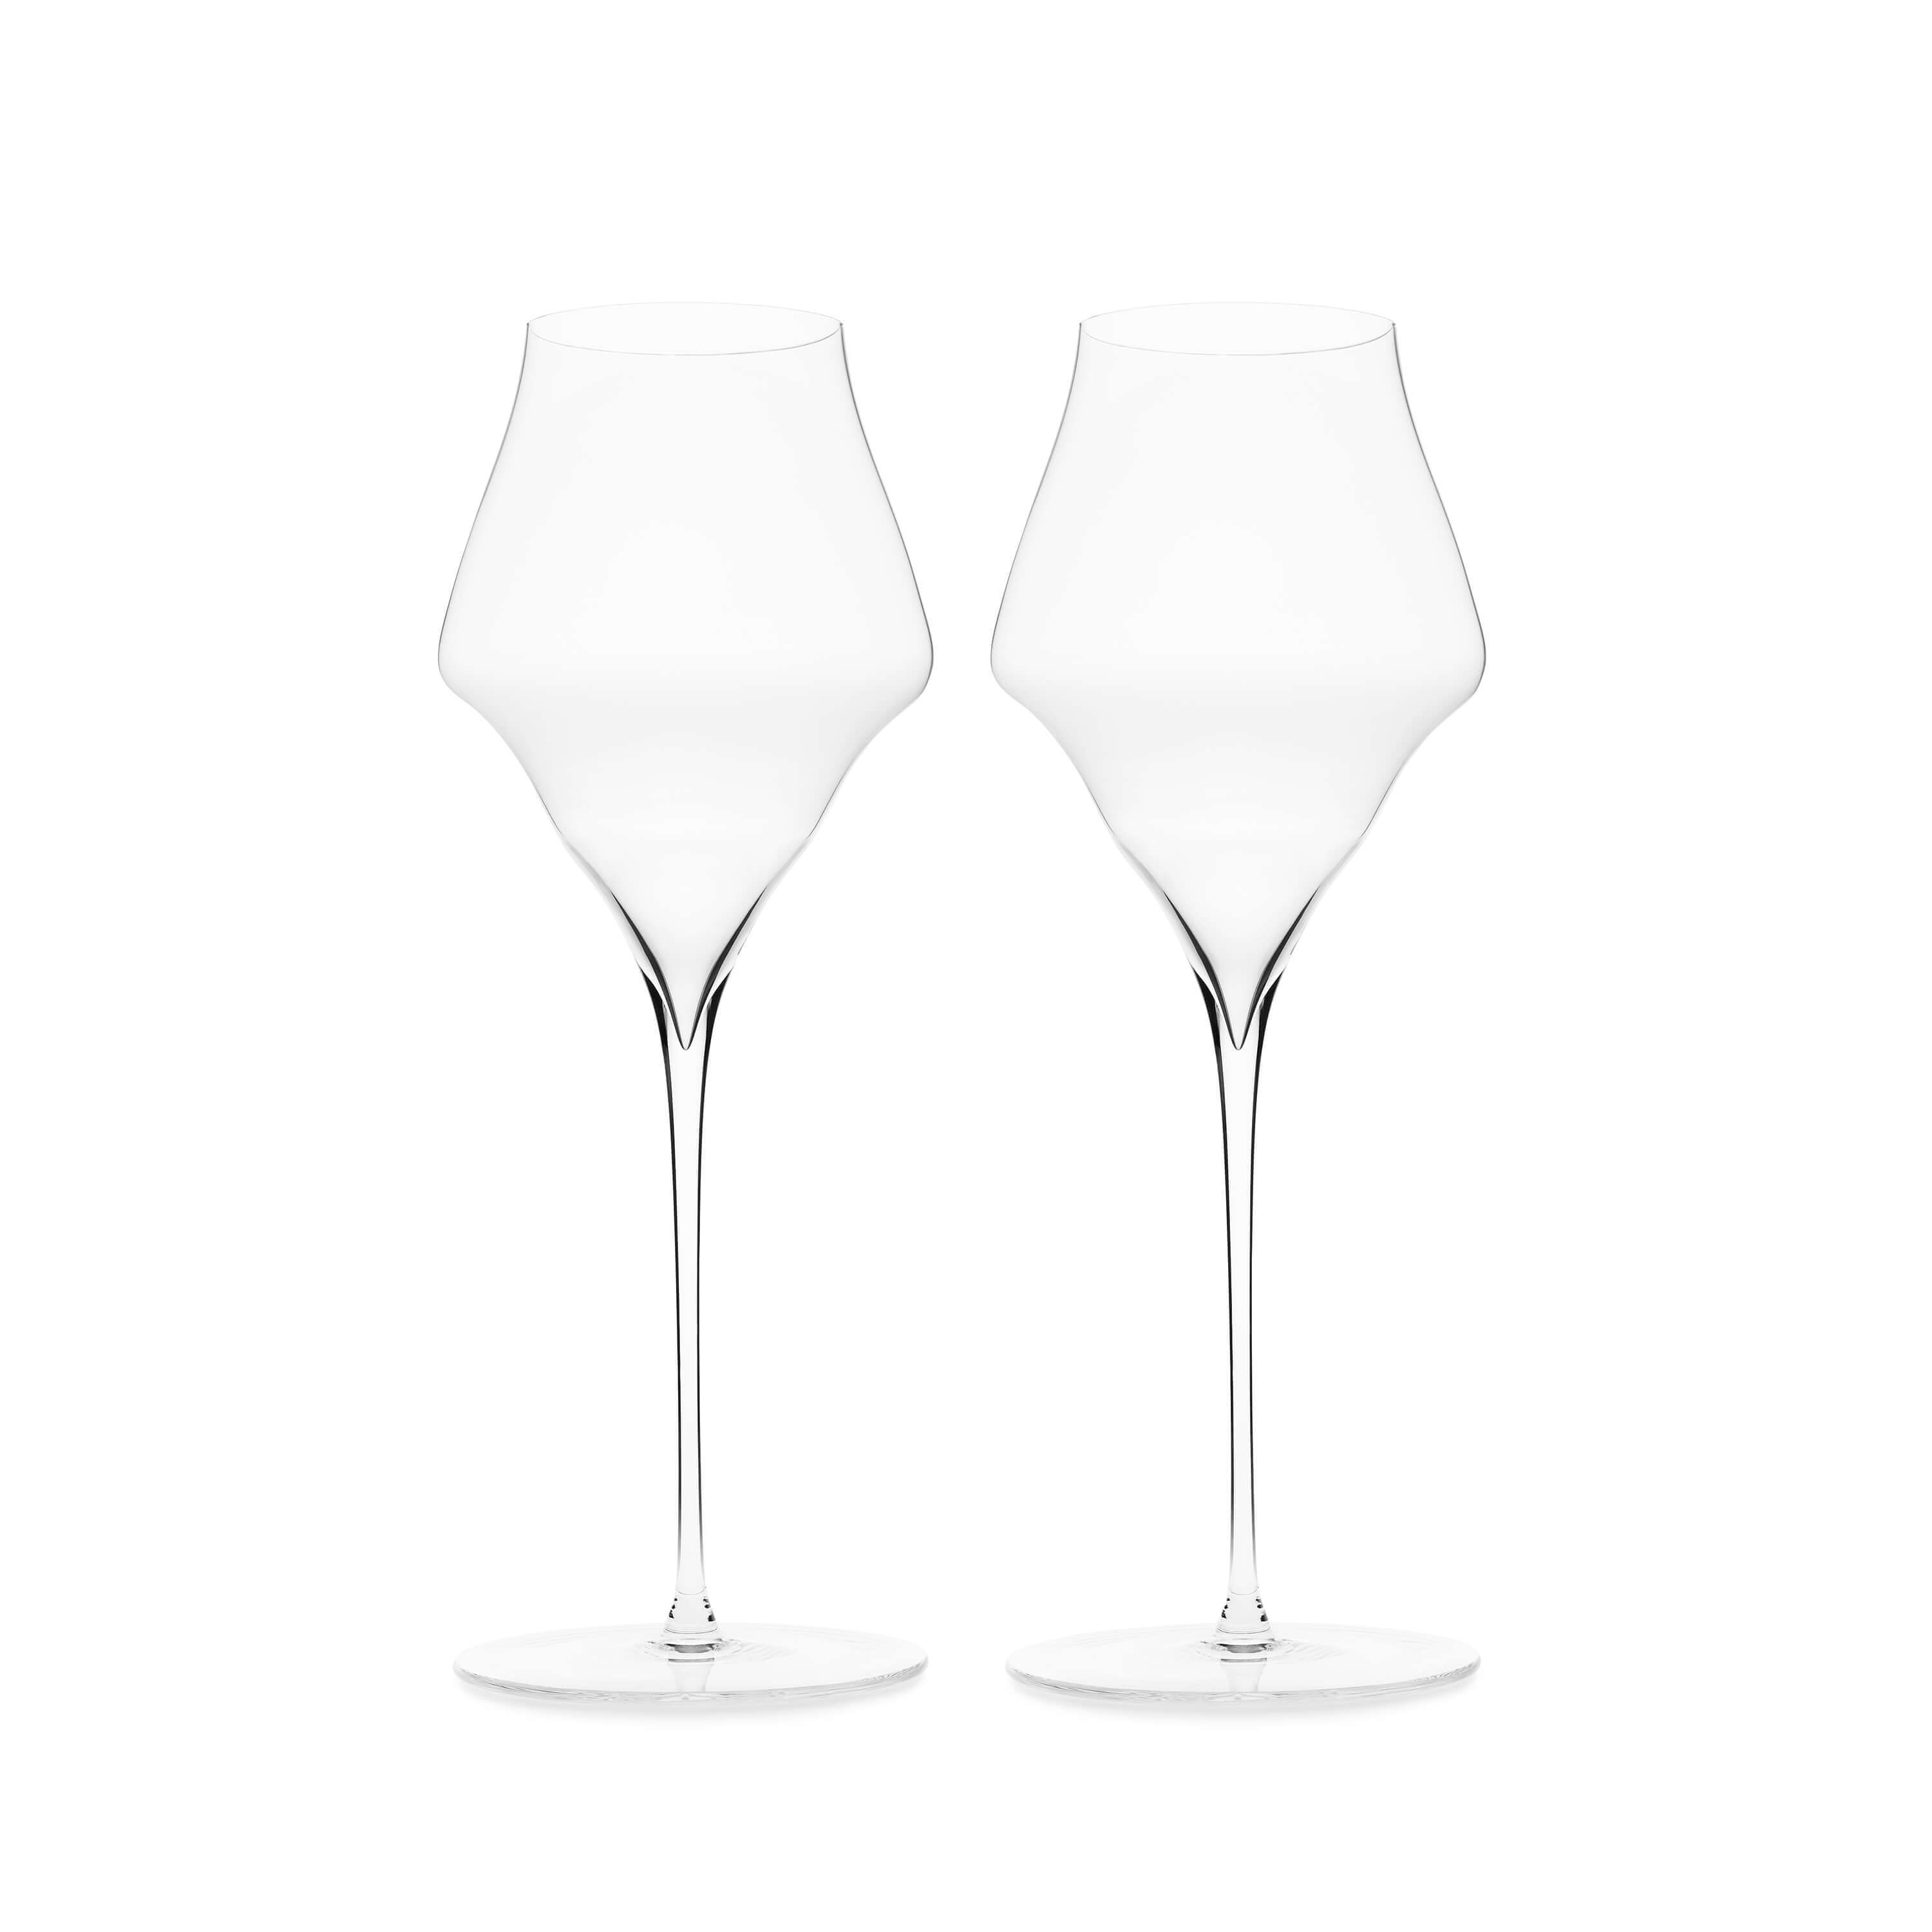 Two Josephine champagne glasses in a set